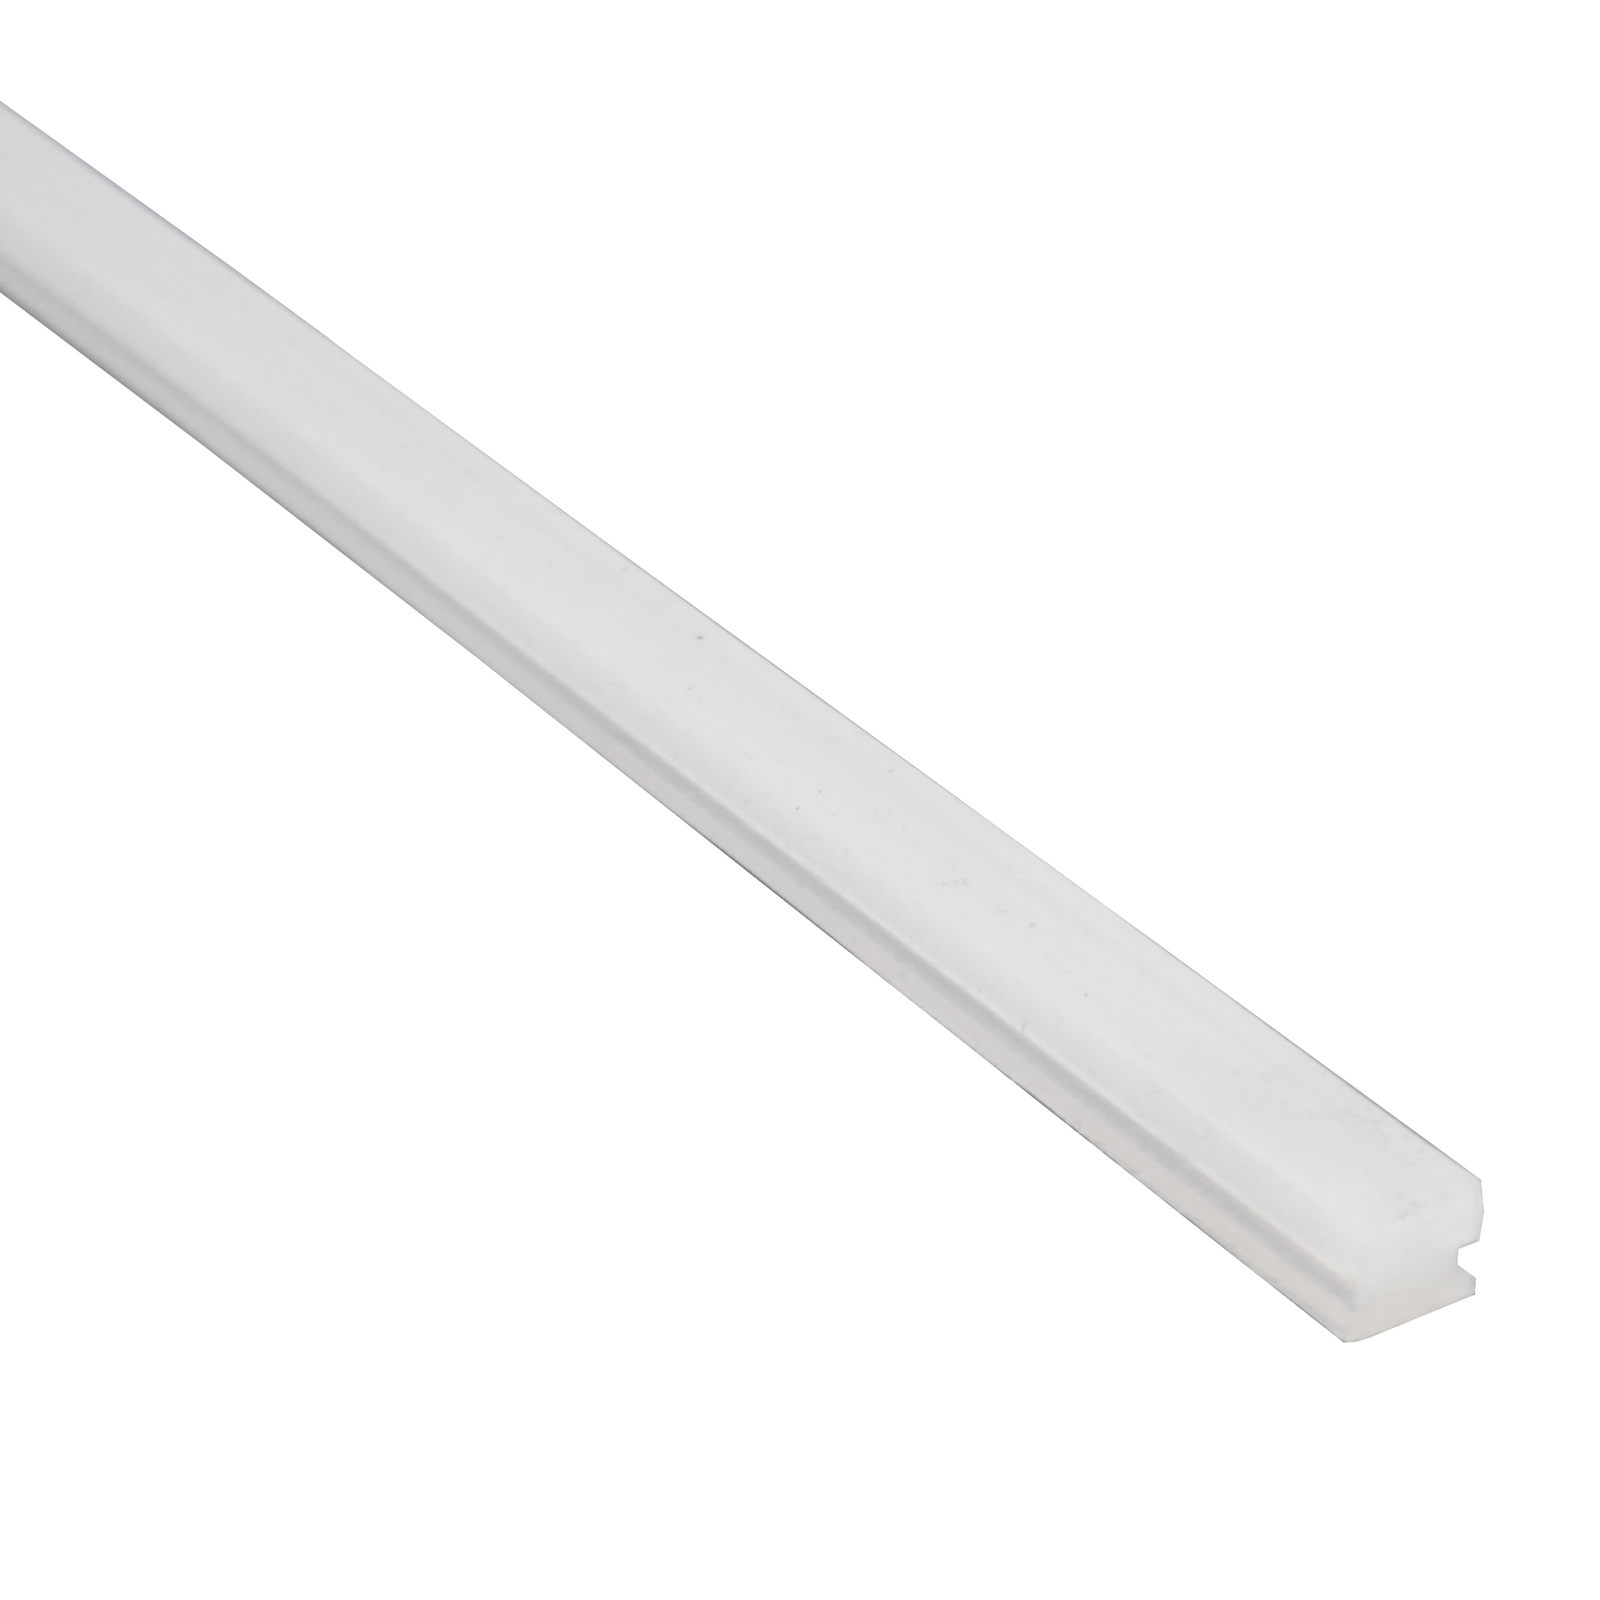 Silicone rubber bar for manual impulse sealers